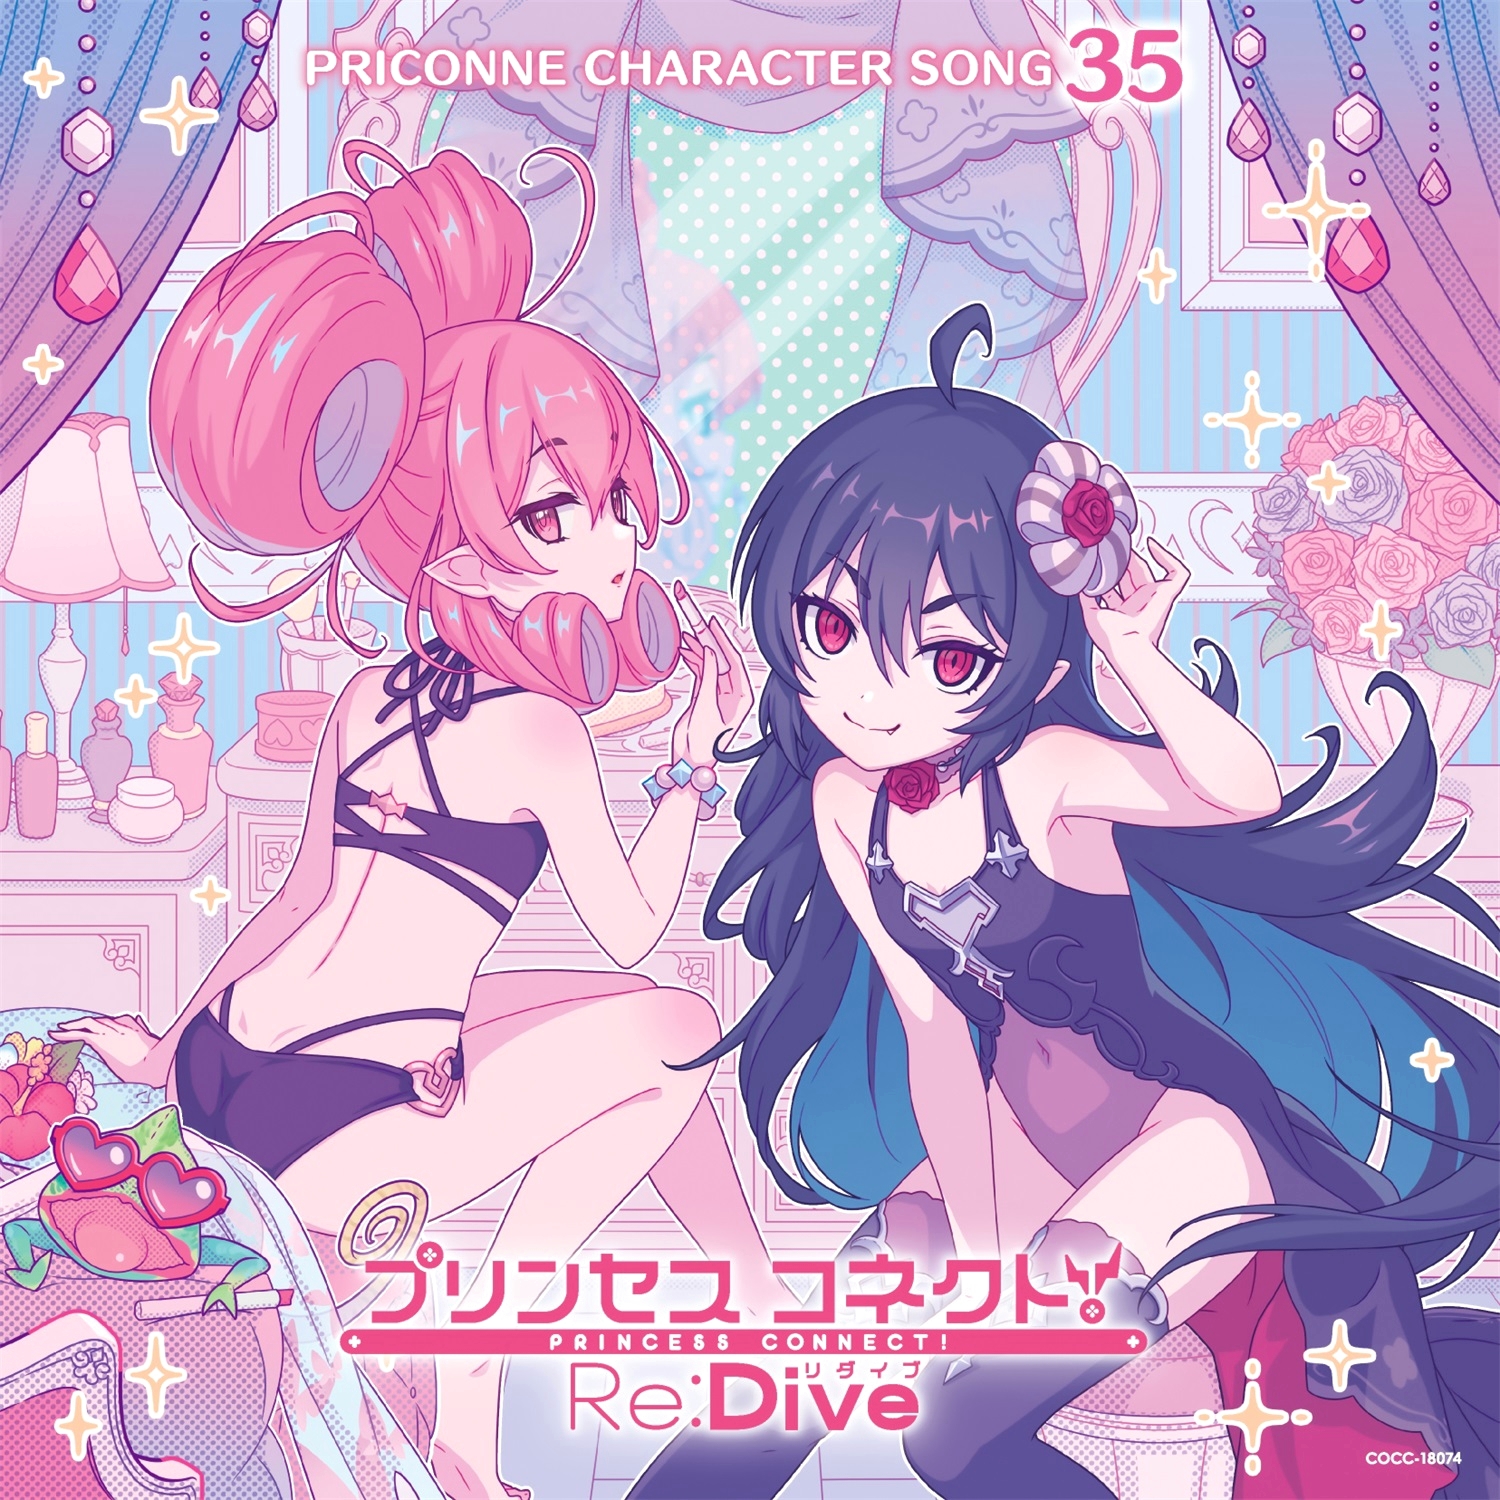 【WAV】ゲーム「プリンセスコネクト! Re:Dive PRINCESS CONNECT! 」Priconne Character Song 35／Cygames